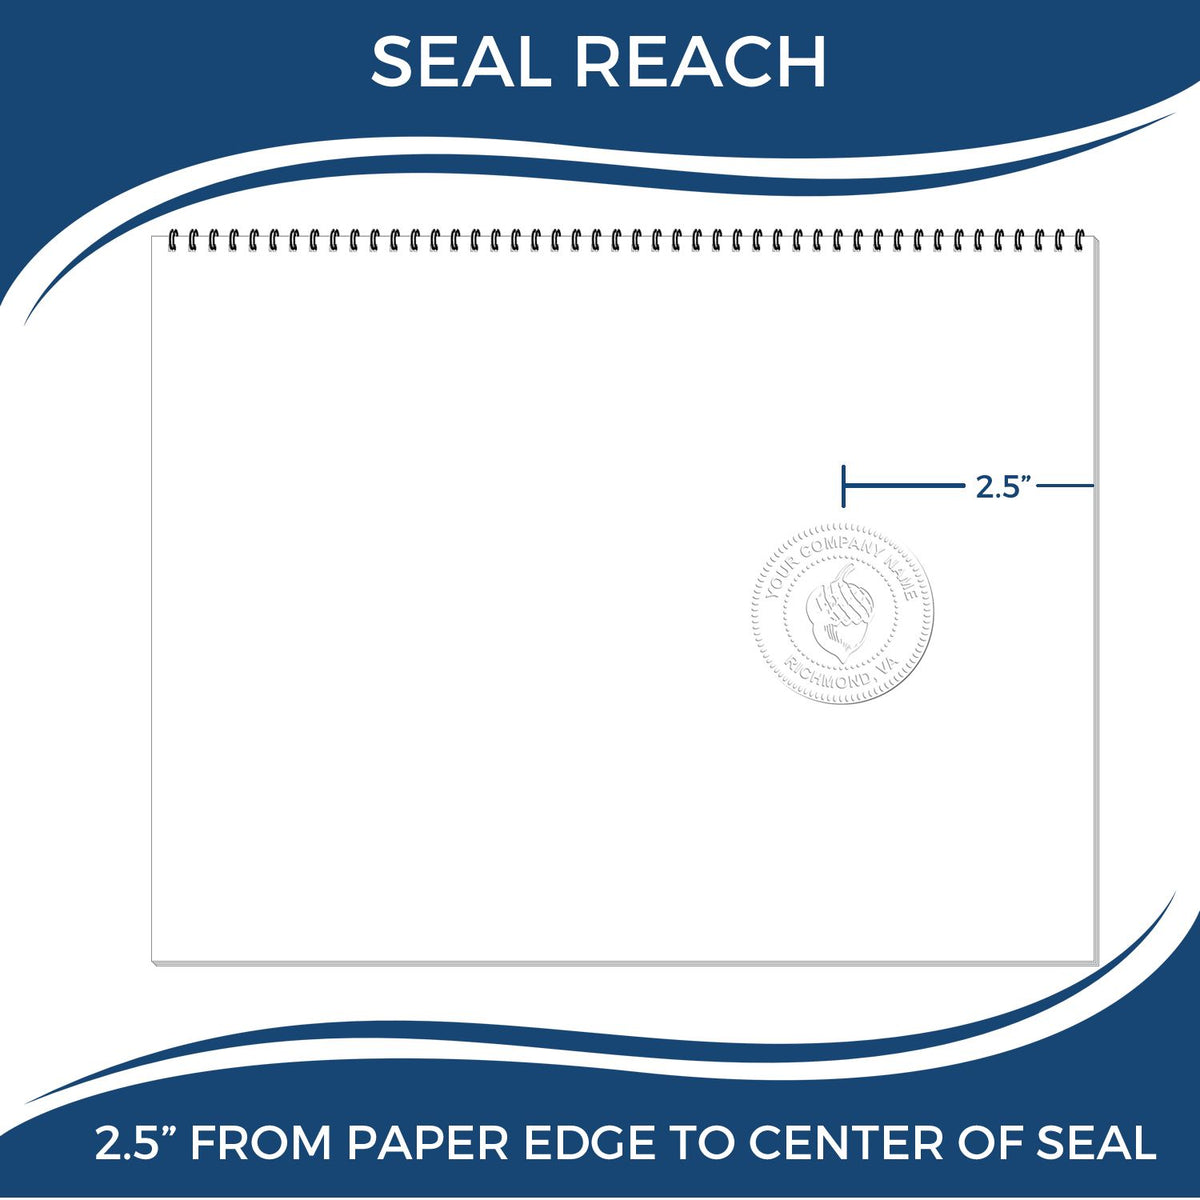 An infographic showing the seal reach which is represented by a ruler and a miniature seal image of the Heavy Duty Cast Iron Louisiana Engineer Seal Embosser